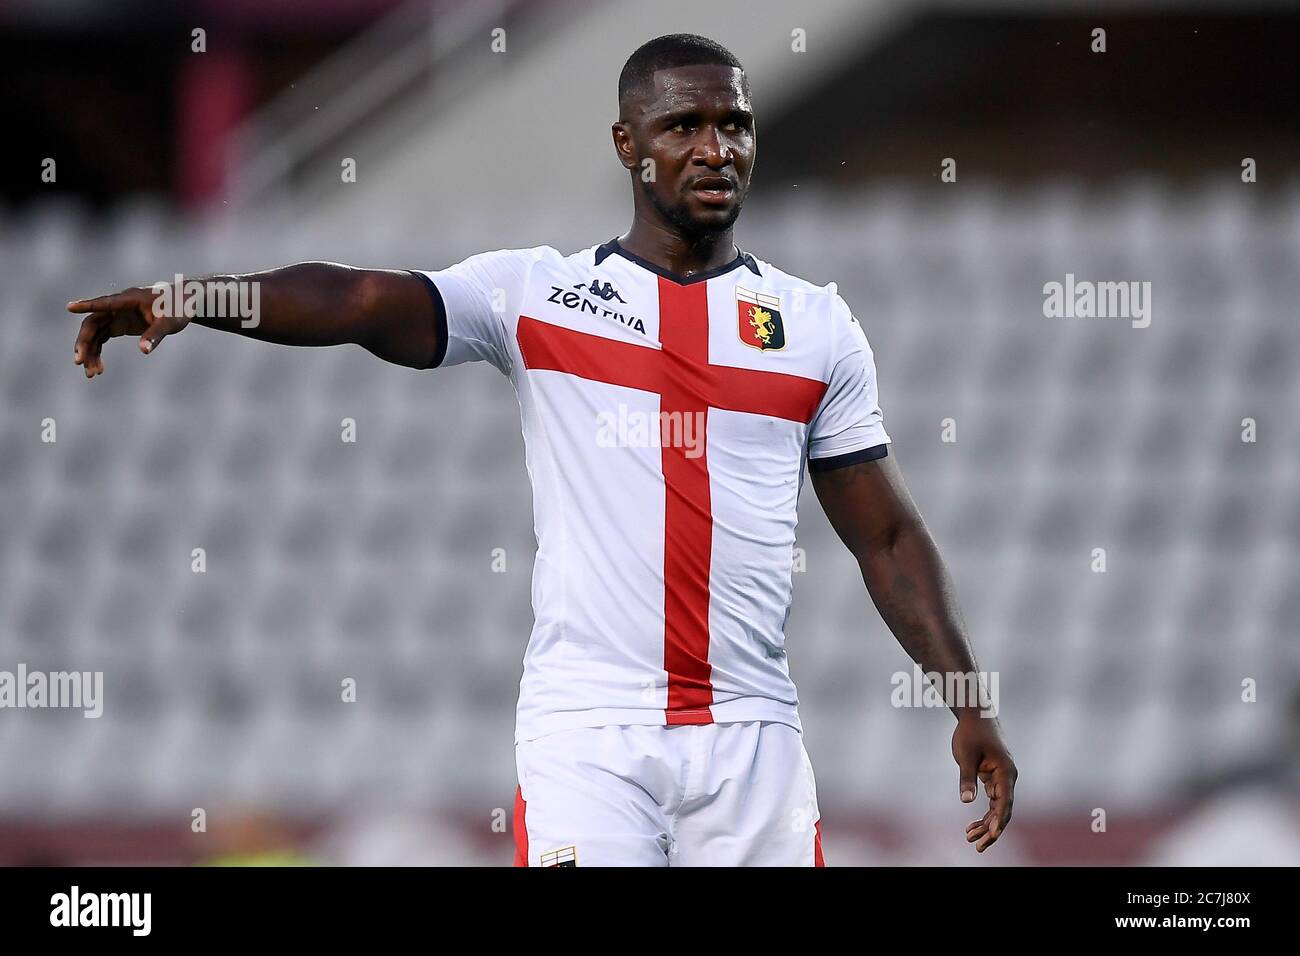 Turin, Italy - 16 July, 2020: Cristian Zapata of Genoa CFC gestures during the Serie A football match between Torino FC and Genoa CFC. Torino FC won 3-0 over Genoa CFC. Credit: Nicolò Campo/Alamy Live News Stock Photo